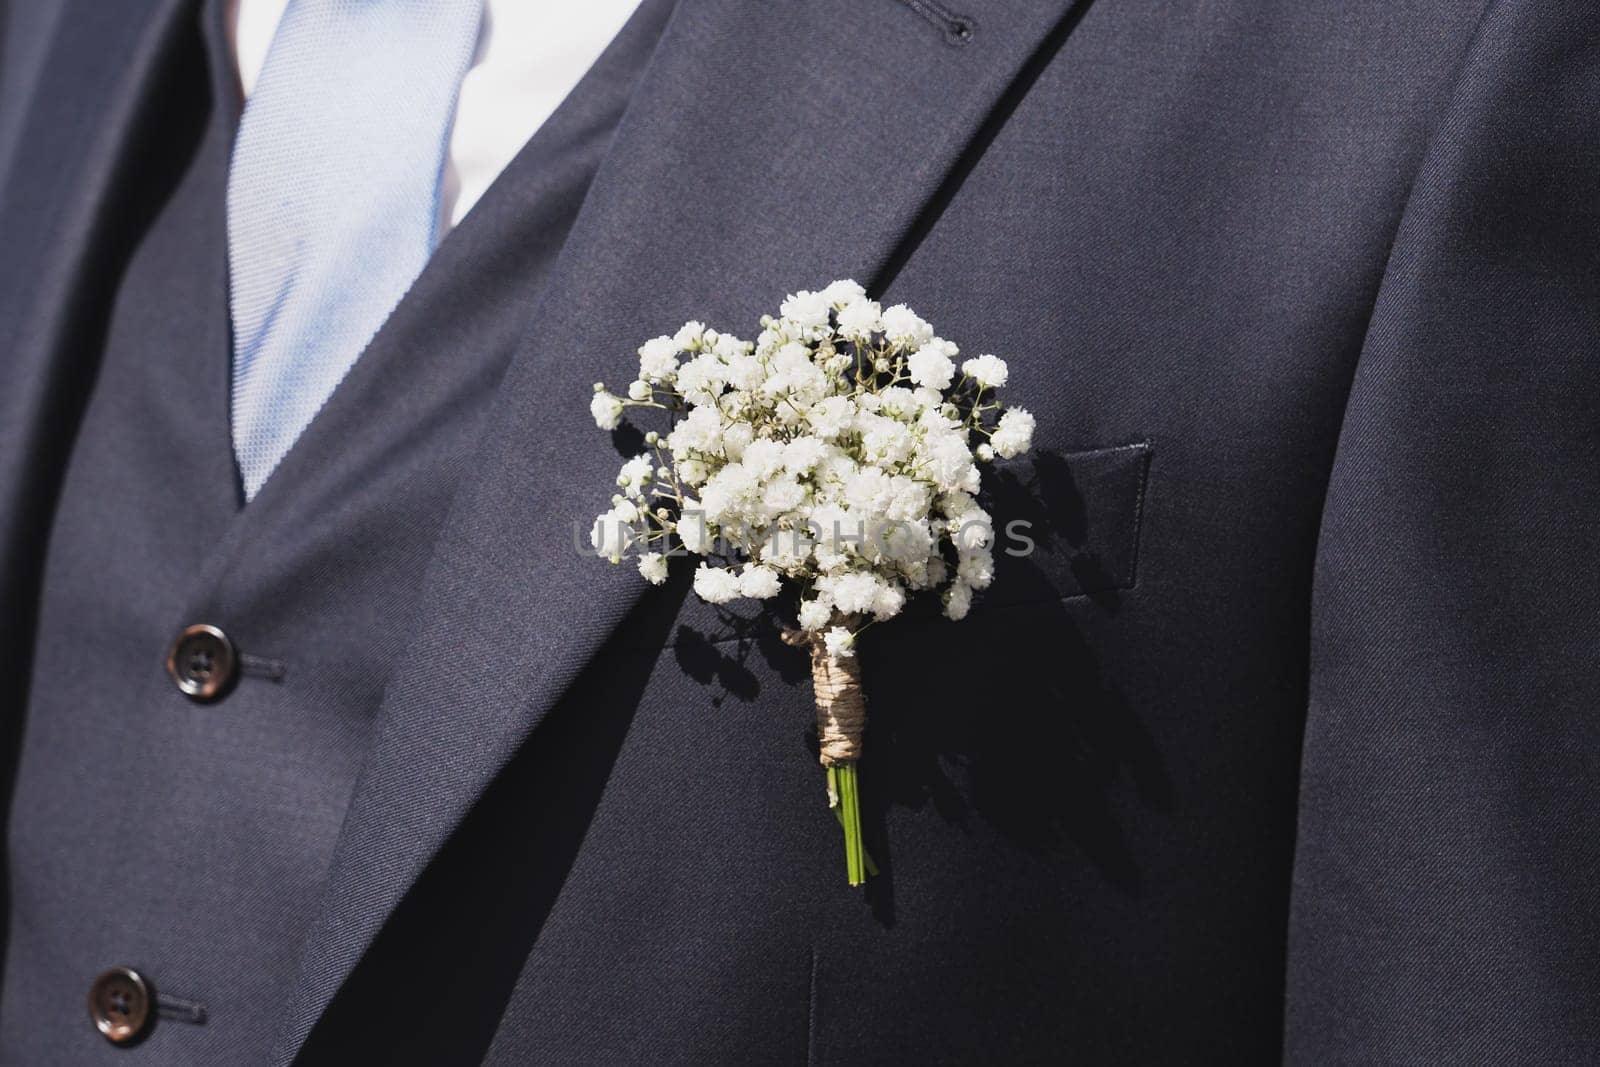 Groom with gypsophila flowers boutonniere at a wedding